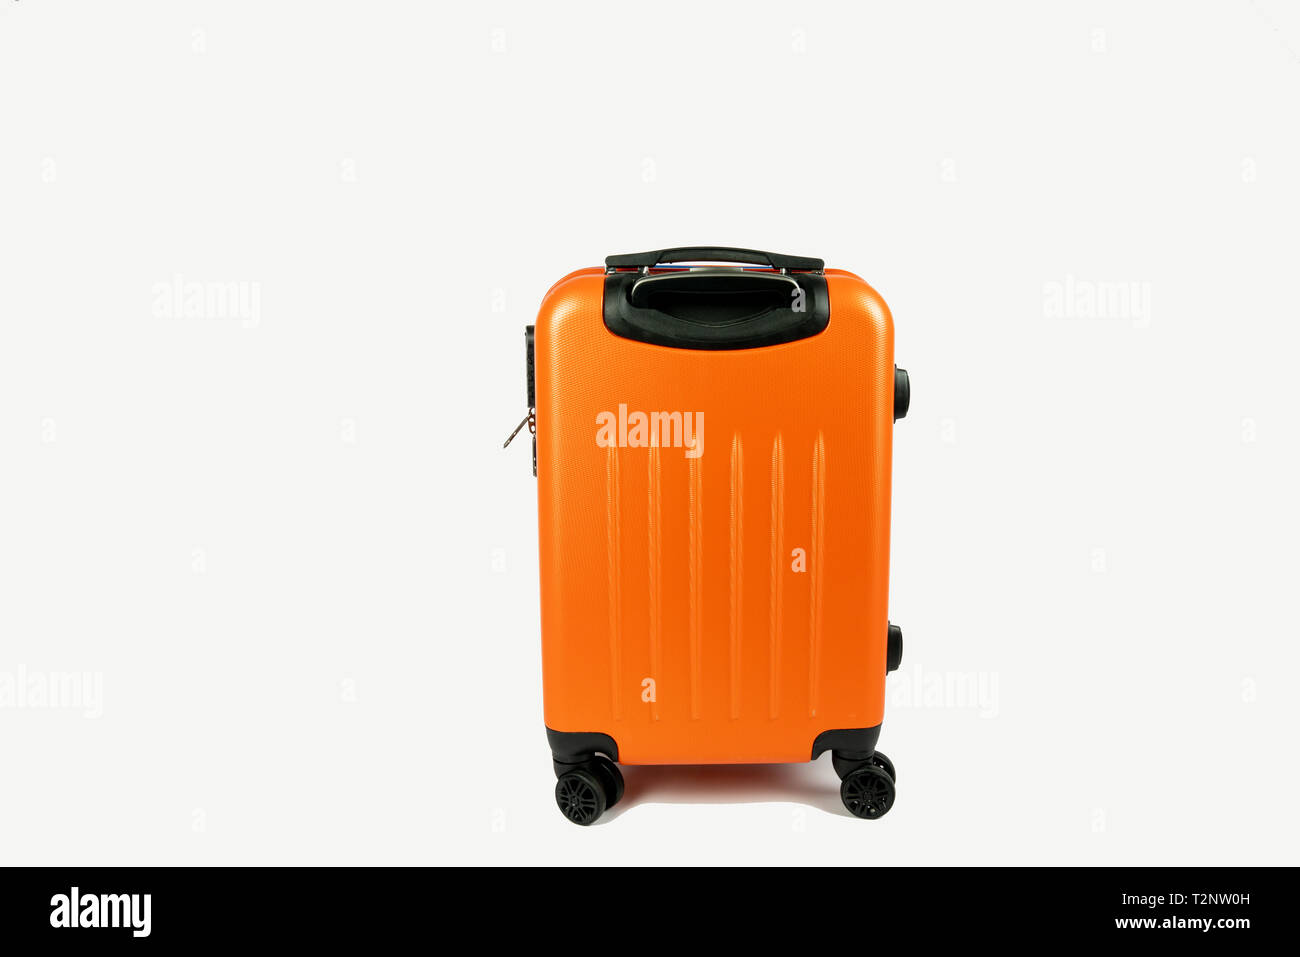 modern orange suitcase. Ready to go for your vacation or business trip. The suitcase is on a white background with space next to it for your own text. Stock Photo